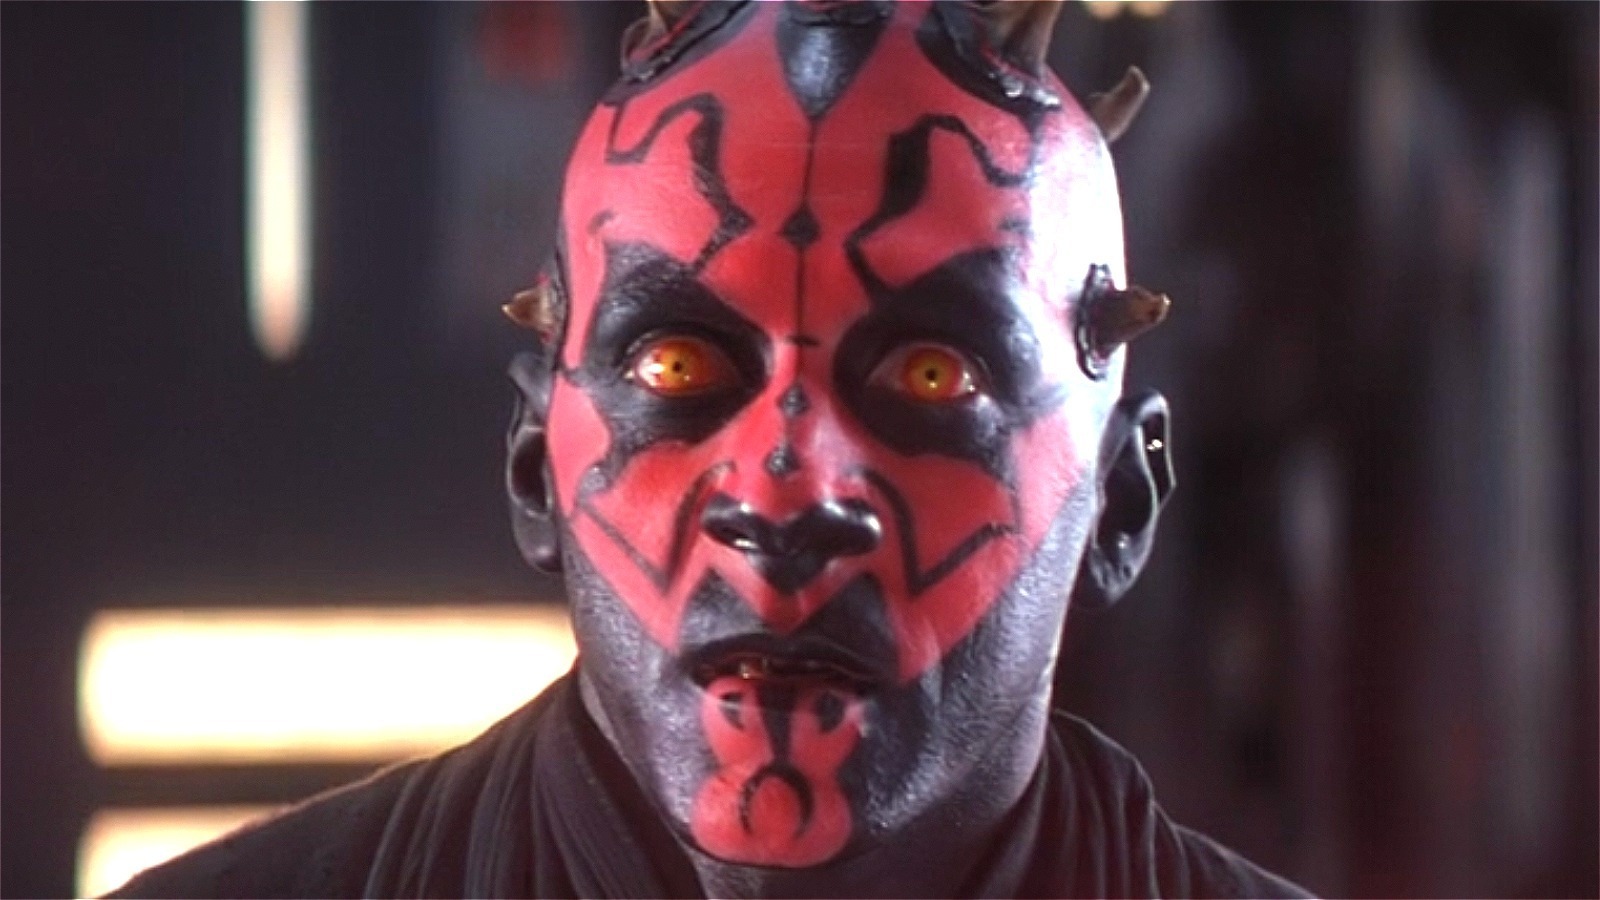 what-you-likely-never-noticed-about-darth-maul-s-scenes-in-star-wars-episode-i